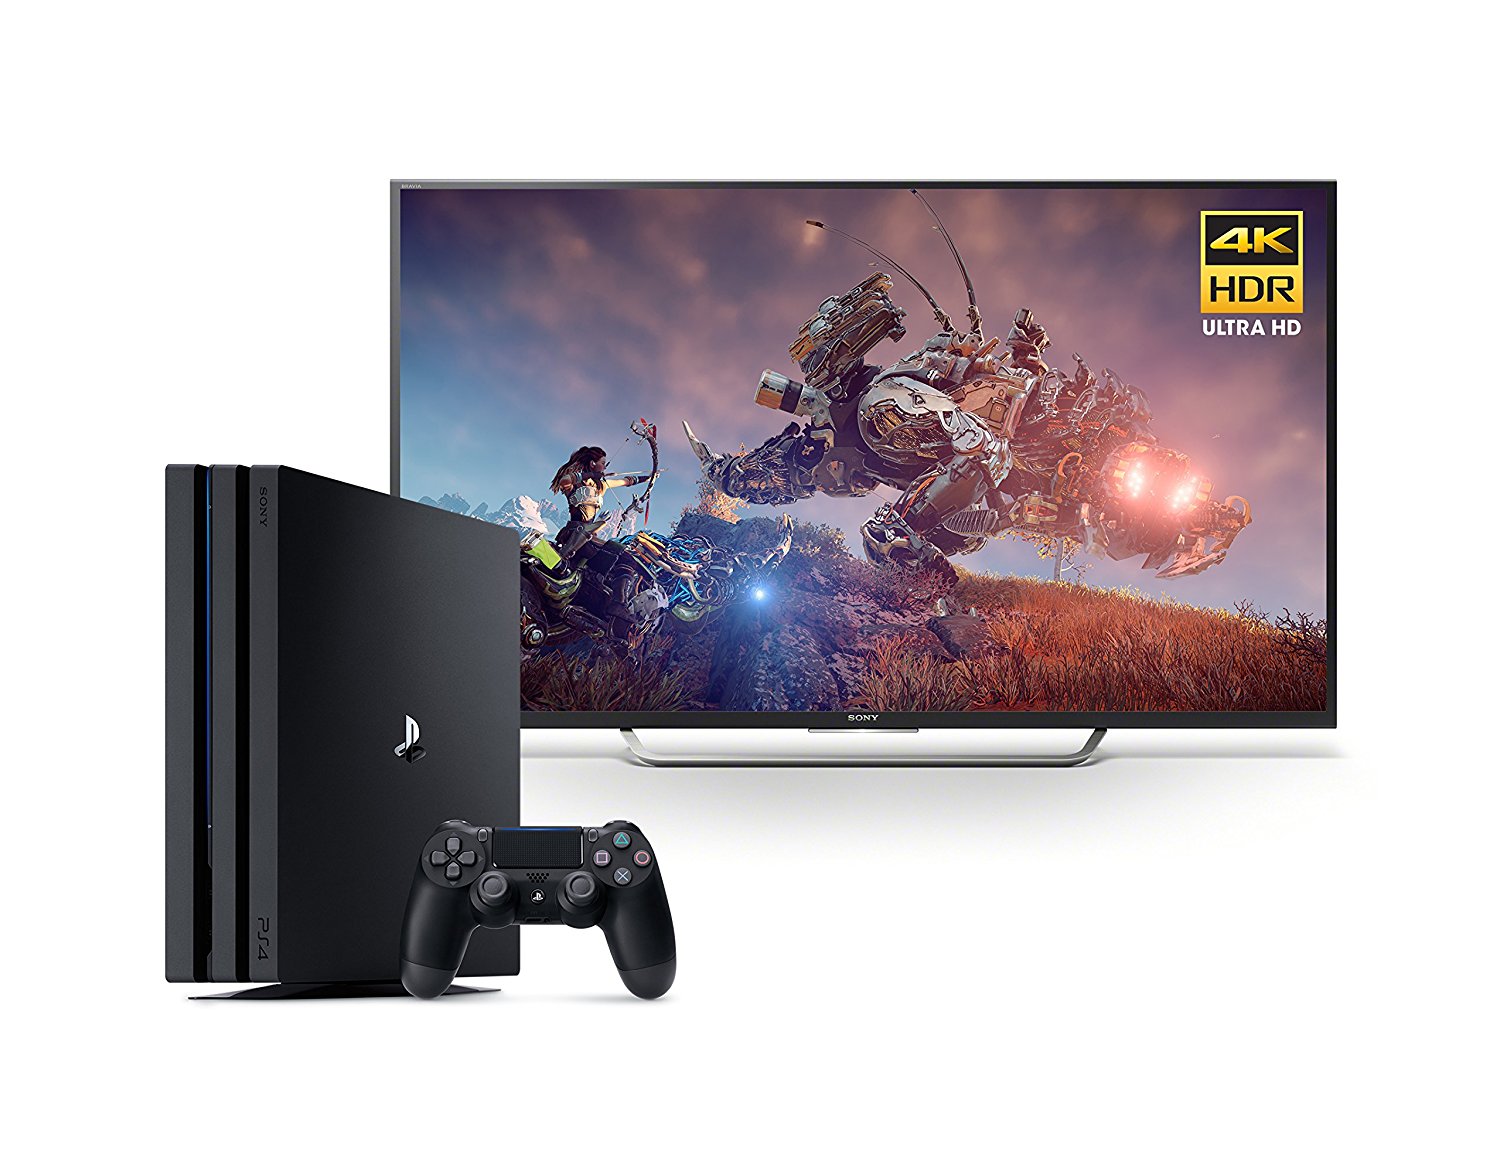 IGN on Twitter: "#BlackFriday: Grab a 55" 4K HDR Sony TV + a #PS4Pro off  Amazon for cheap! https://t.co/fL6DINwiF4 https://t.co/hFygcf5DmT" / Twitter